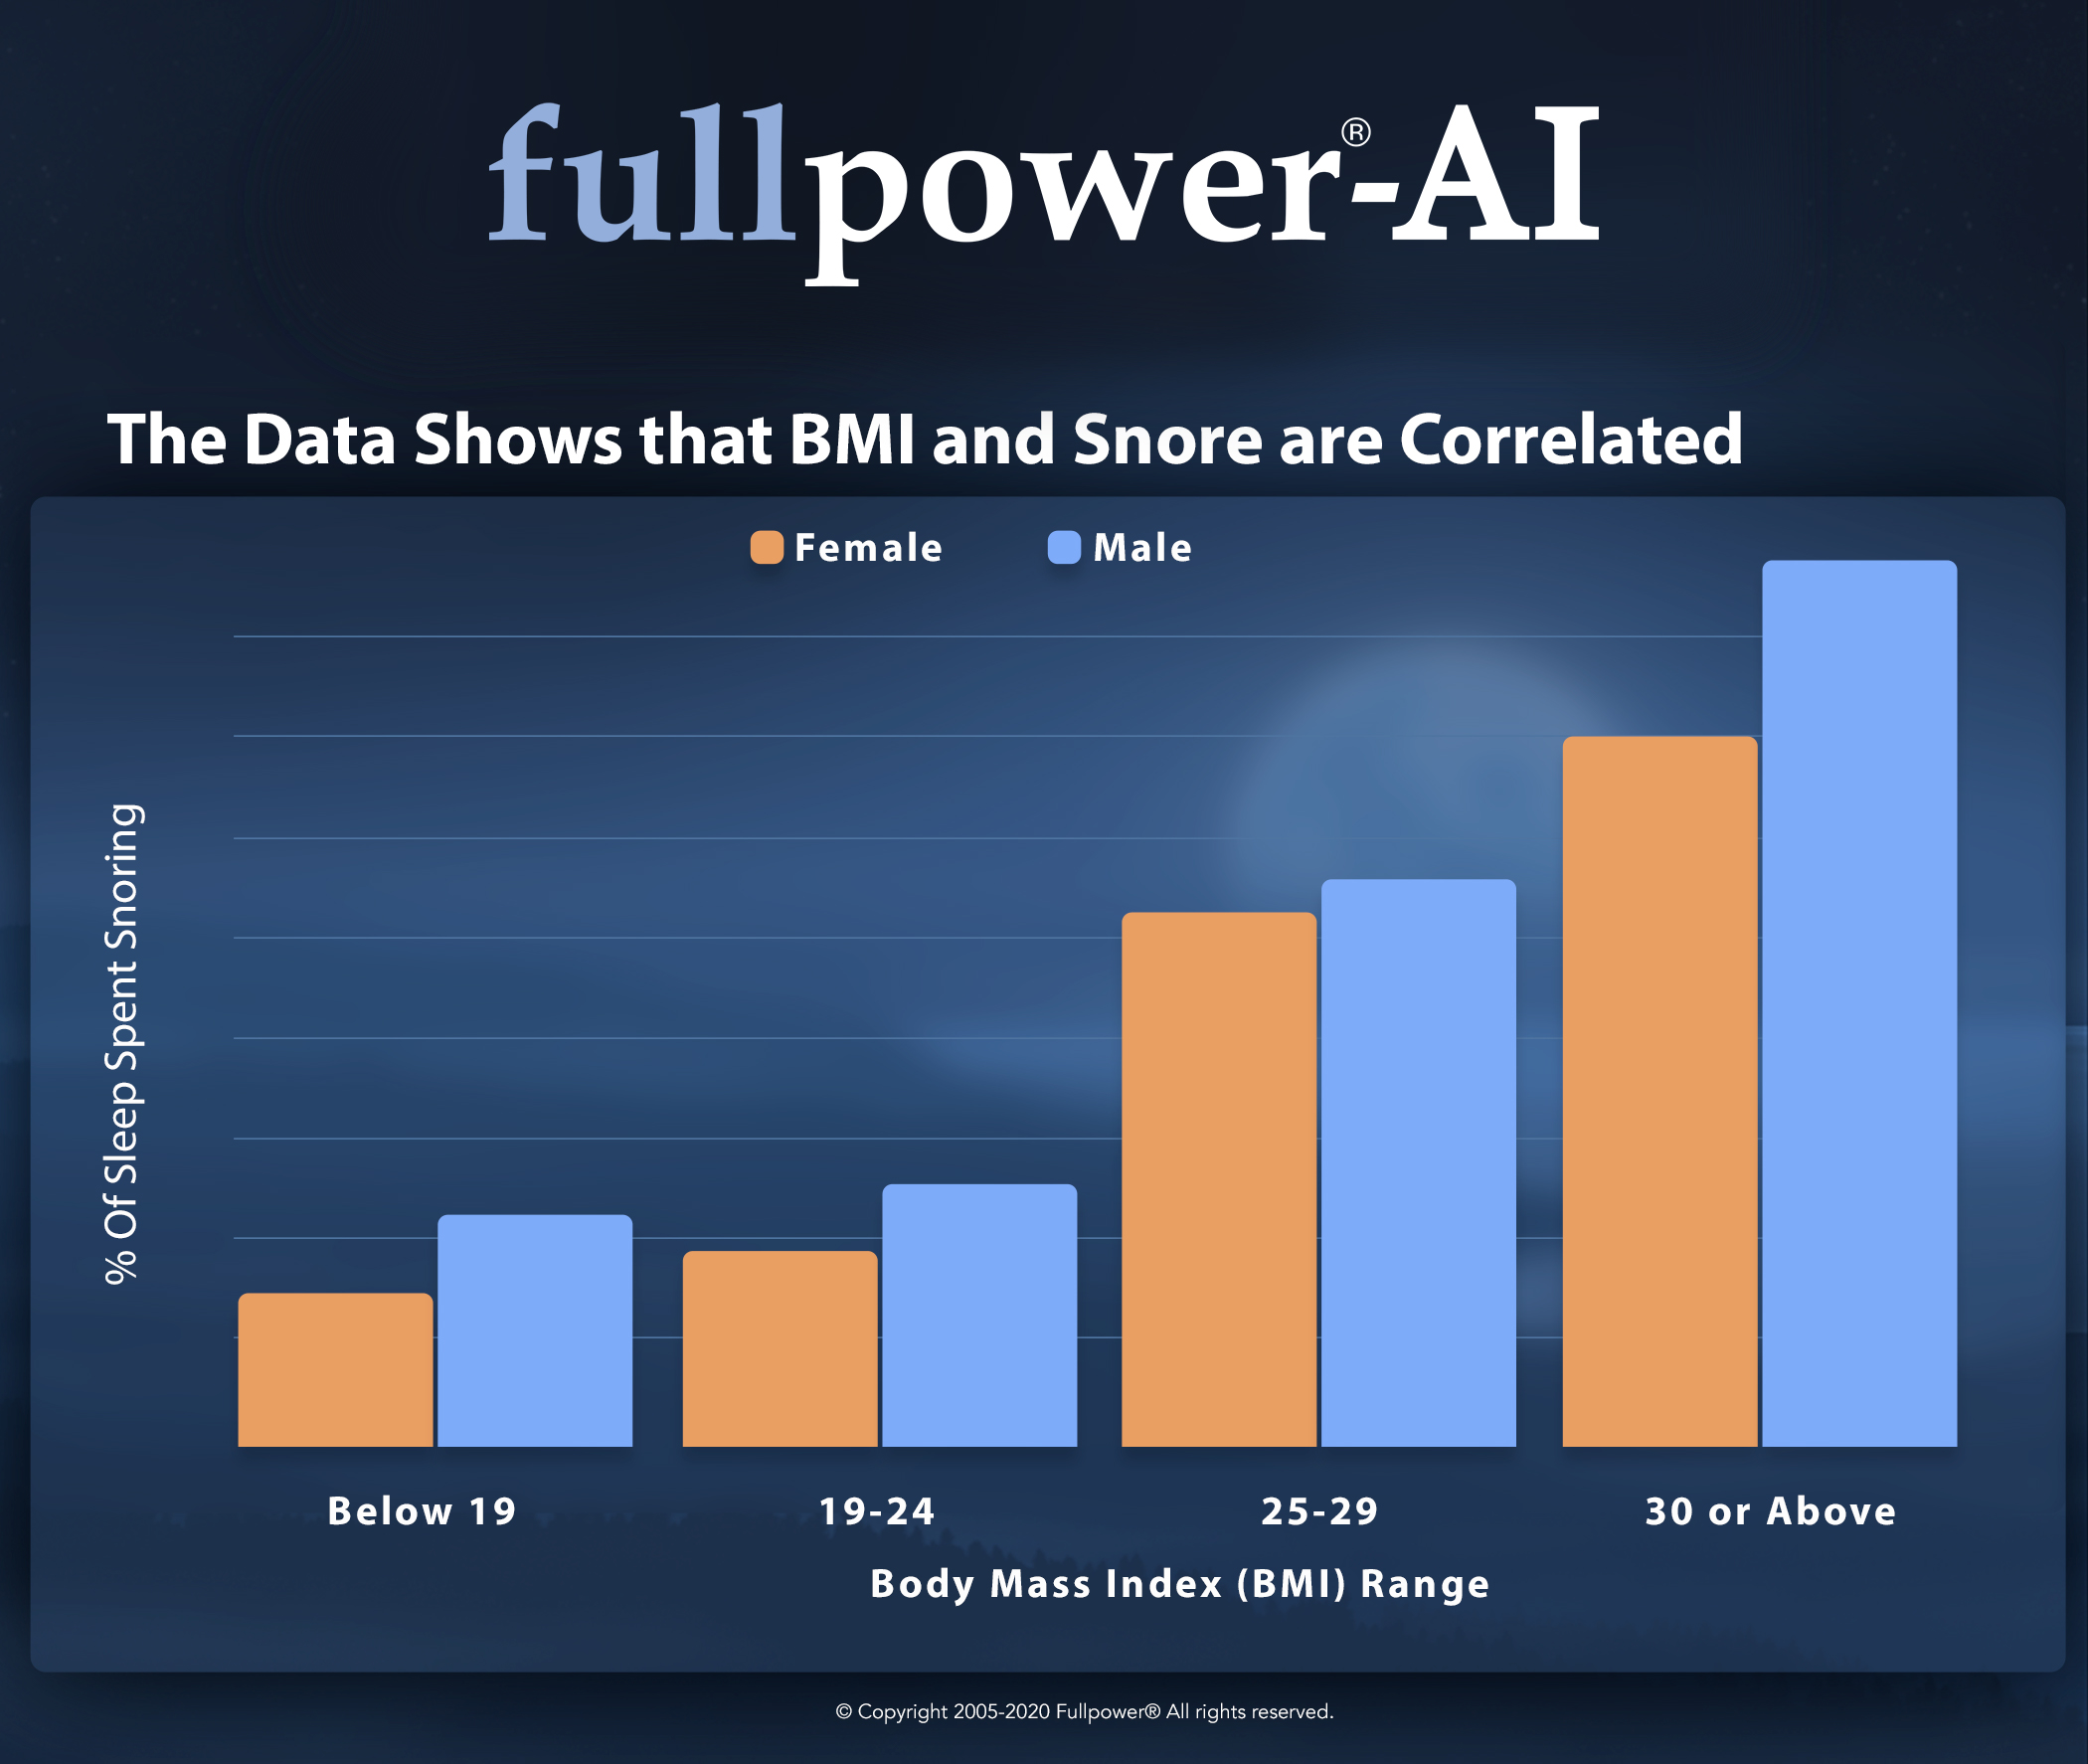 The Data Shows BMI & Snore are Correlated